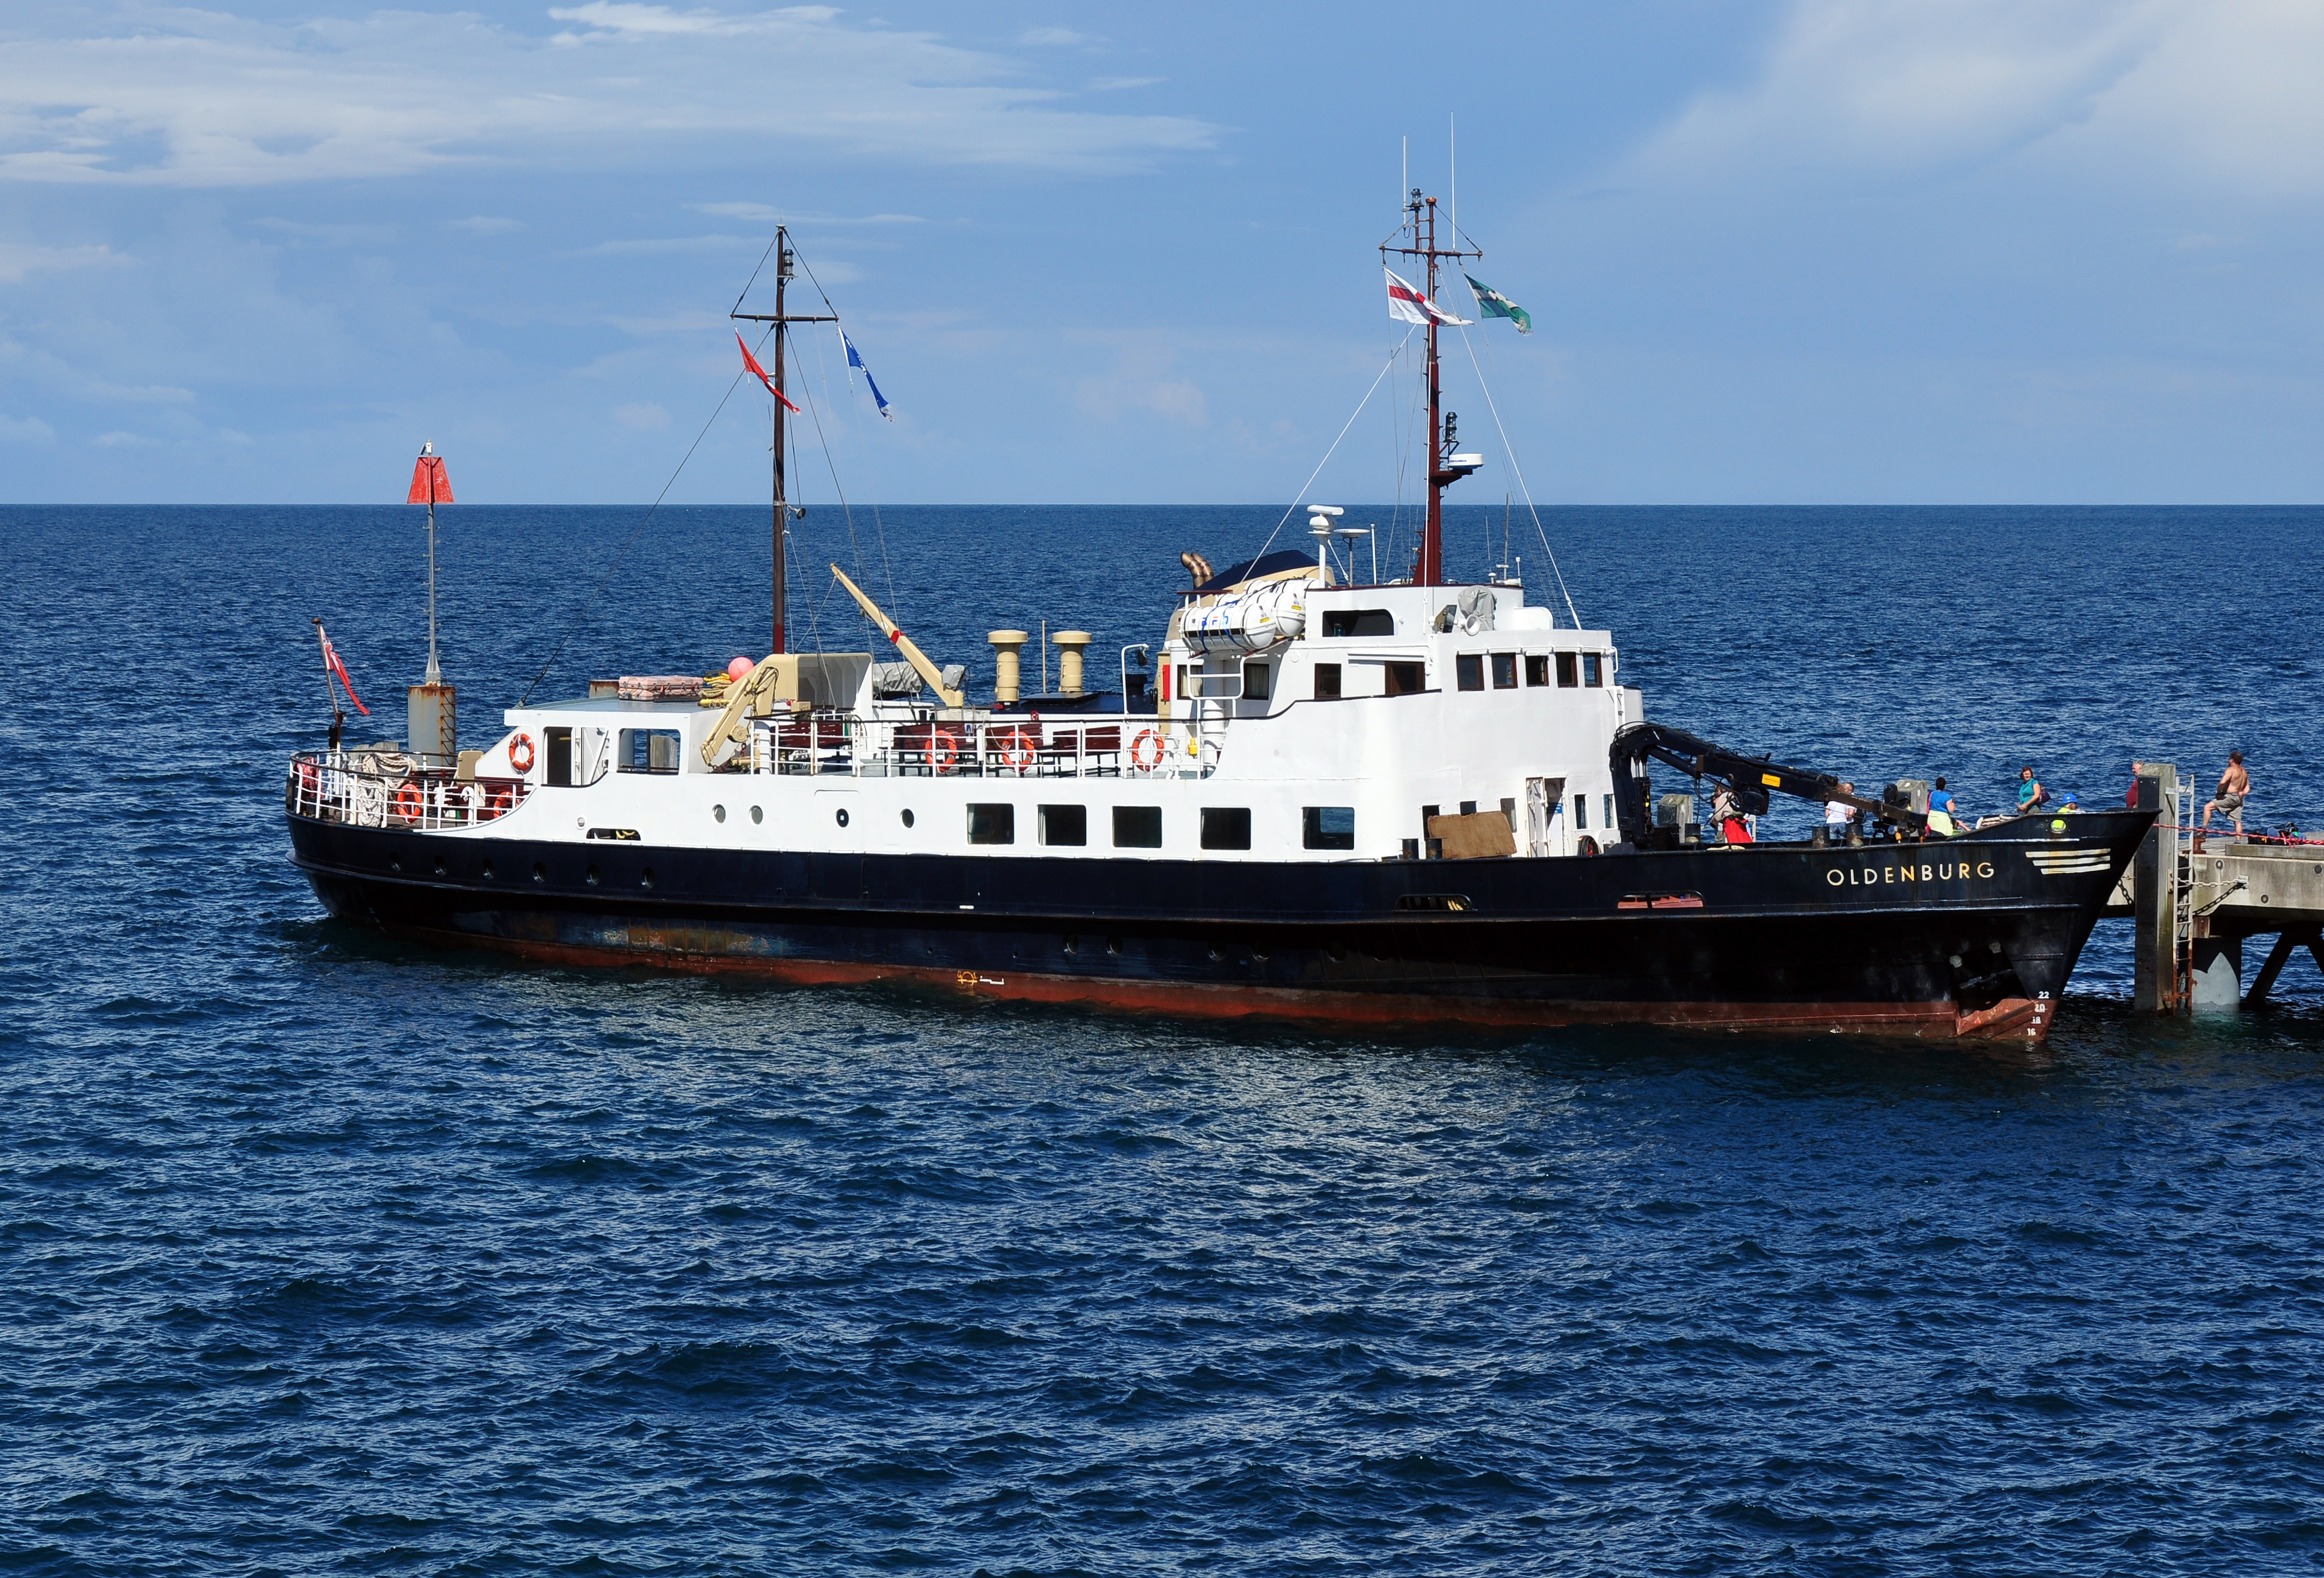 MS Oldenbury at Lundy